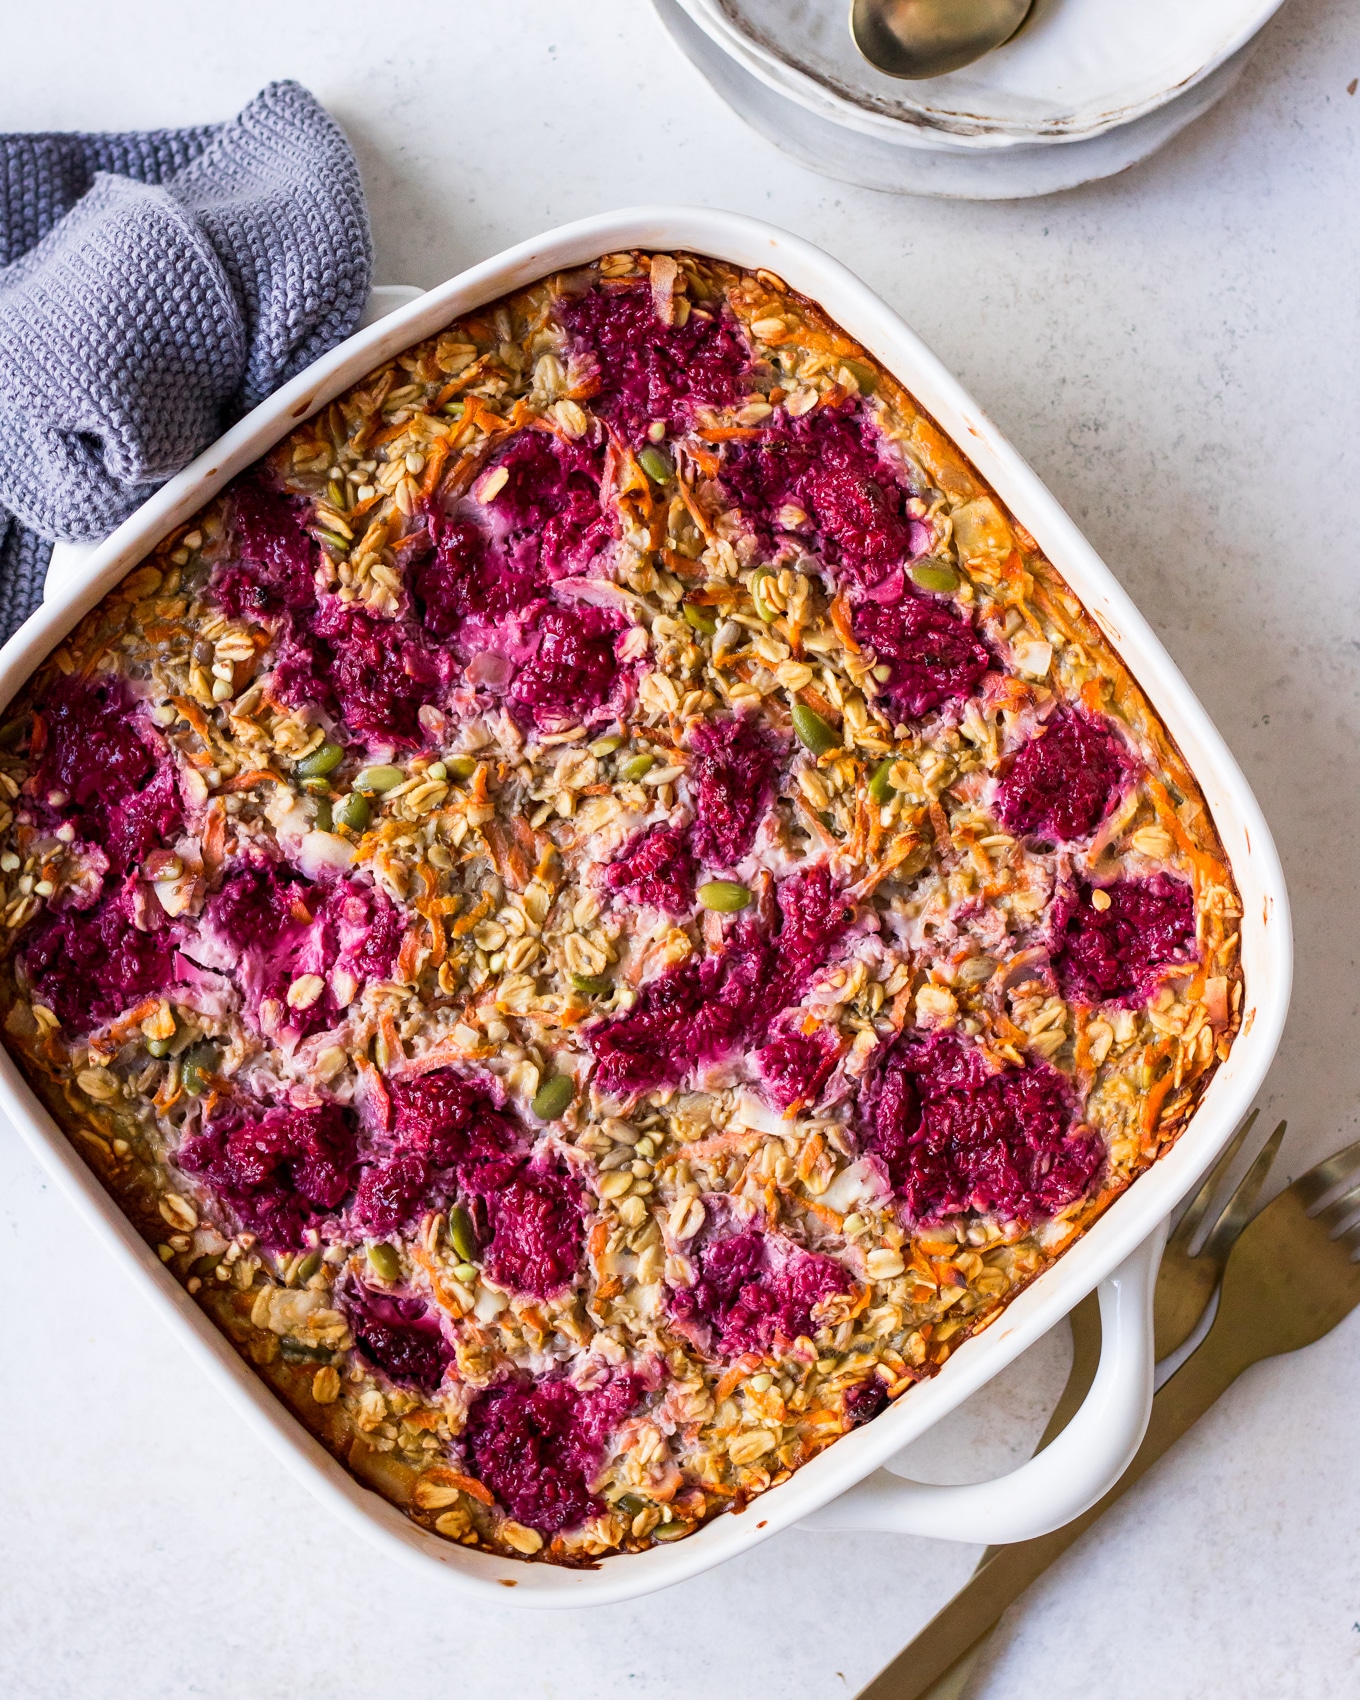 Carrot and Raspberry Baked Oatmeal in a white square dish